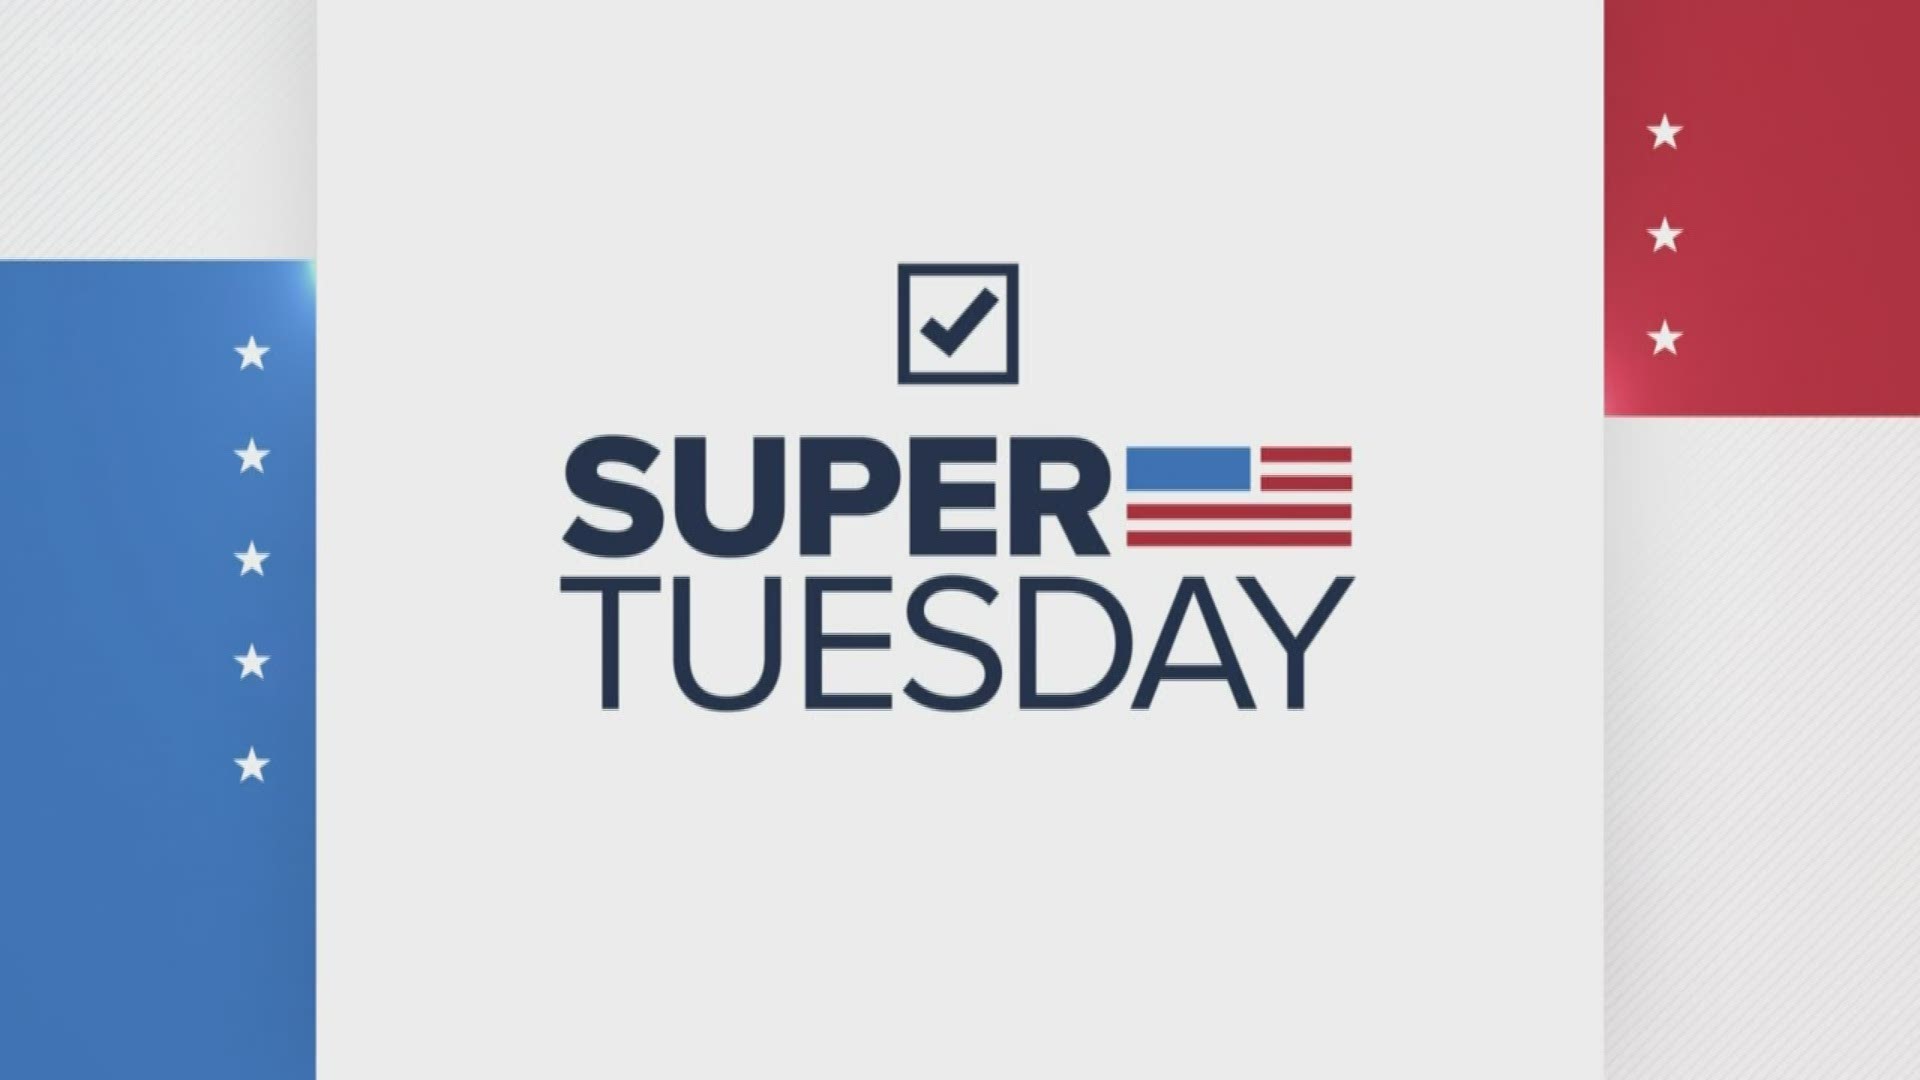 Political experts Republican Kelly Maher and Democrat James Mejia join us to discuss results from Super Tuesday 2020.